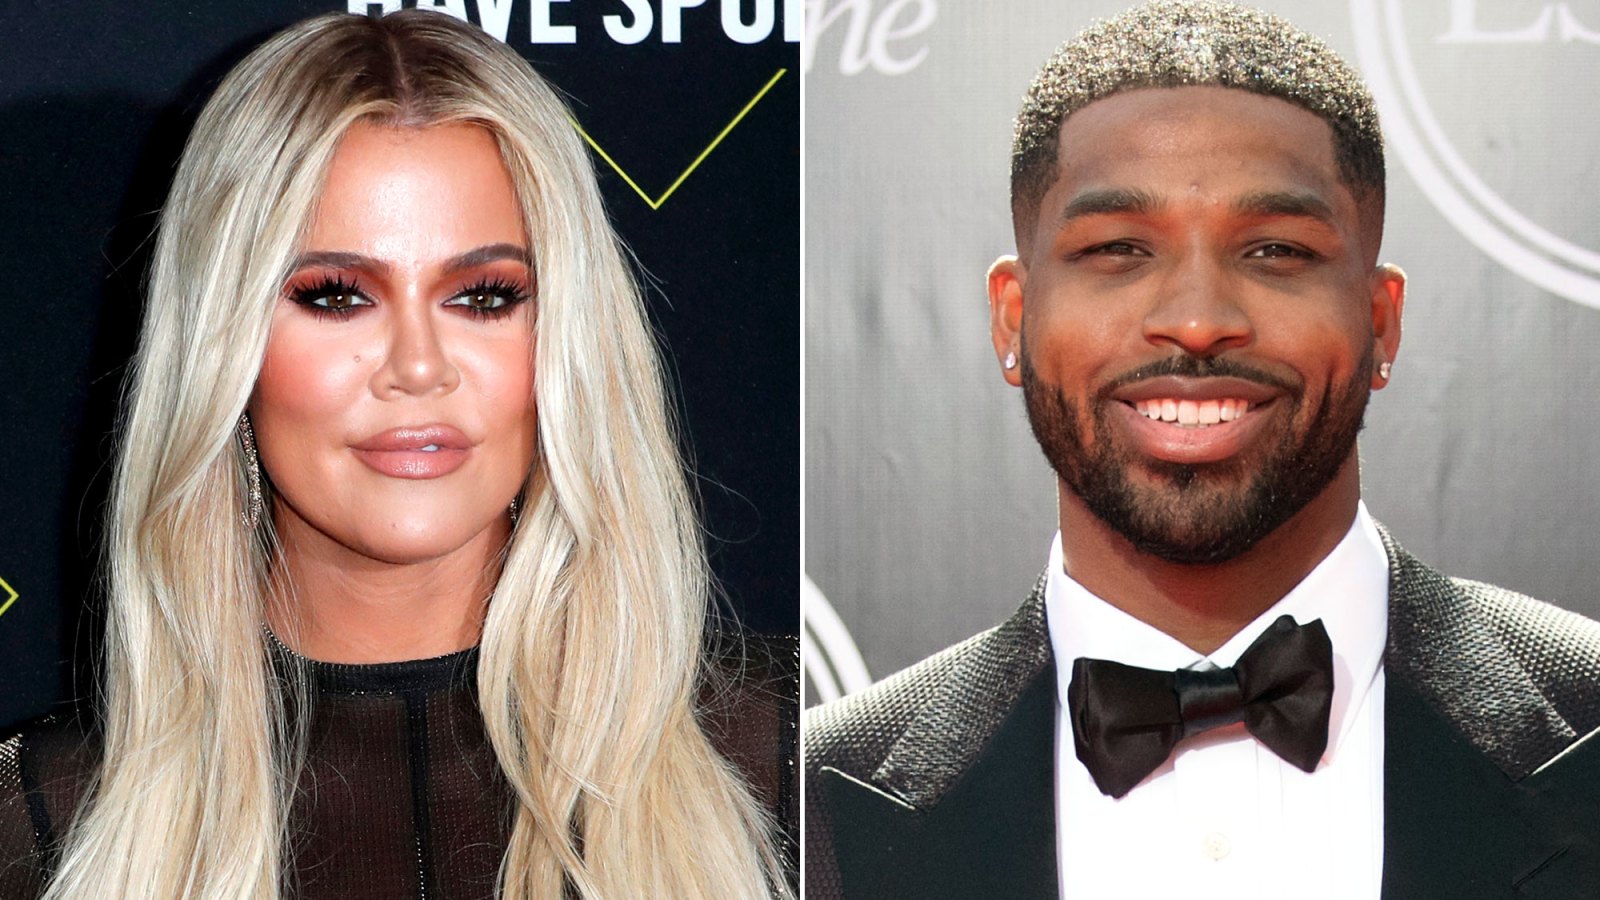 Khloe Kardashian and Tristan Thompson Have ‘Not Hooked Up’ Since Spli